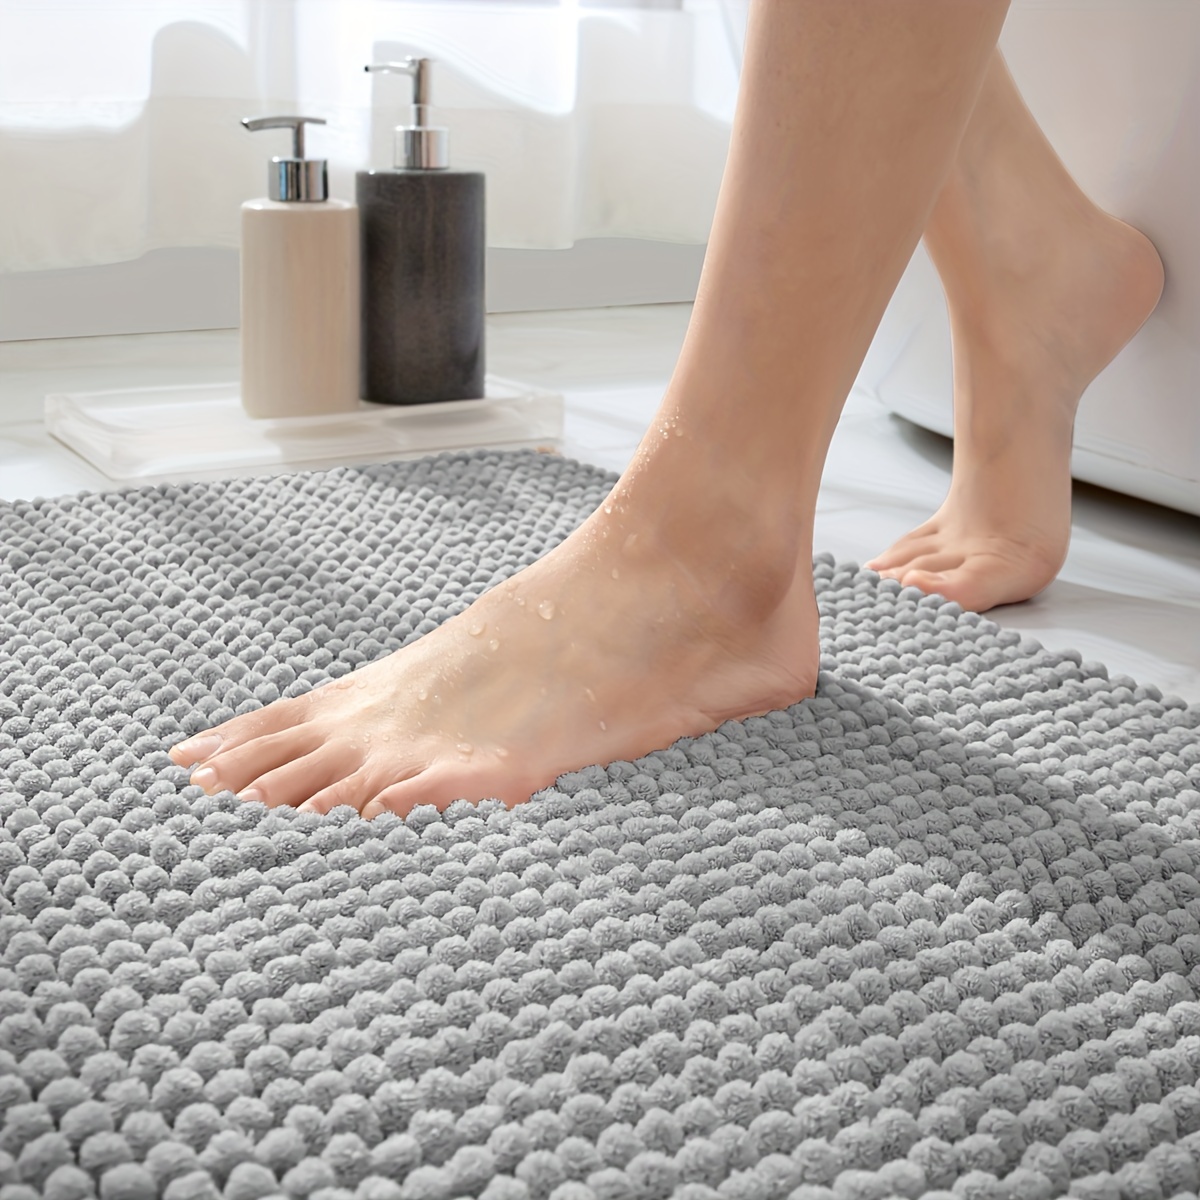 JTdiffer Small Bathroom Rug 15x19 inch Non Slip, Super Absorbent Bathroom  Mat, Extra Soft Bath Mat and Quick Dry Chenille Bath Rugs Carpet for RV